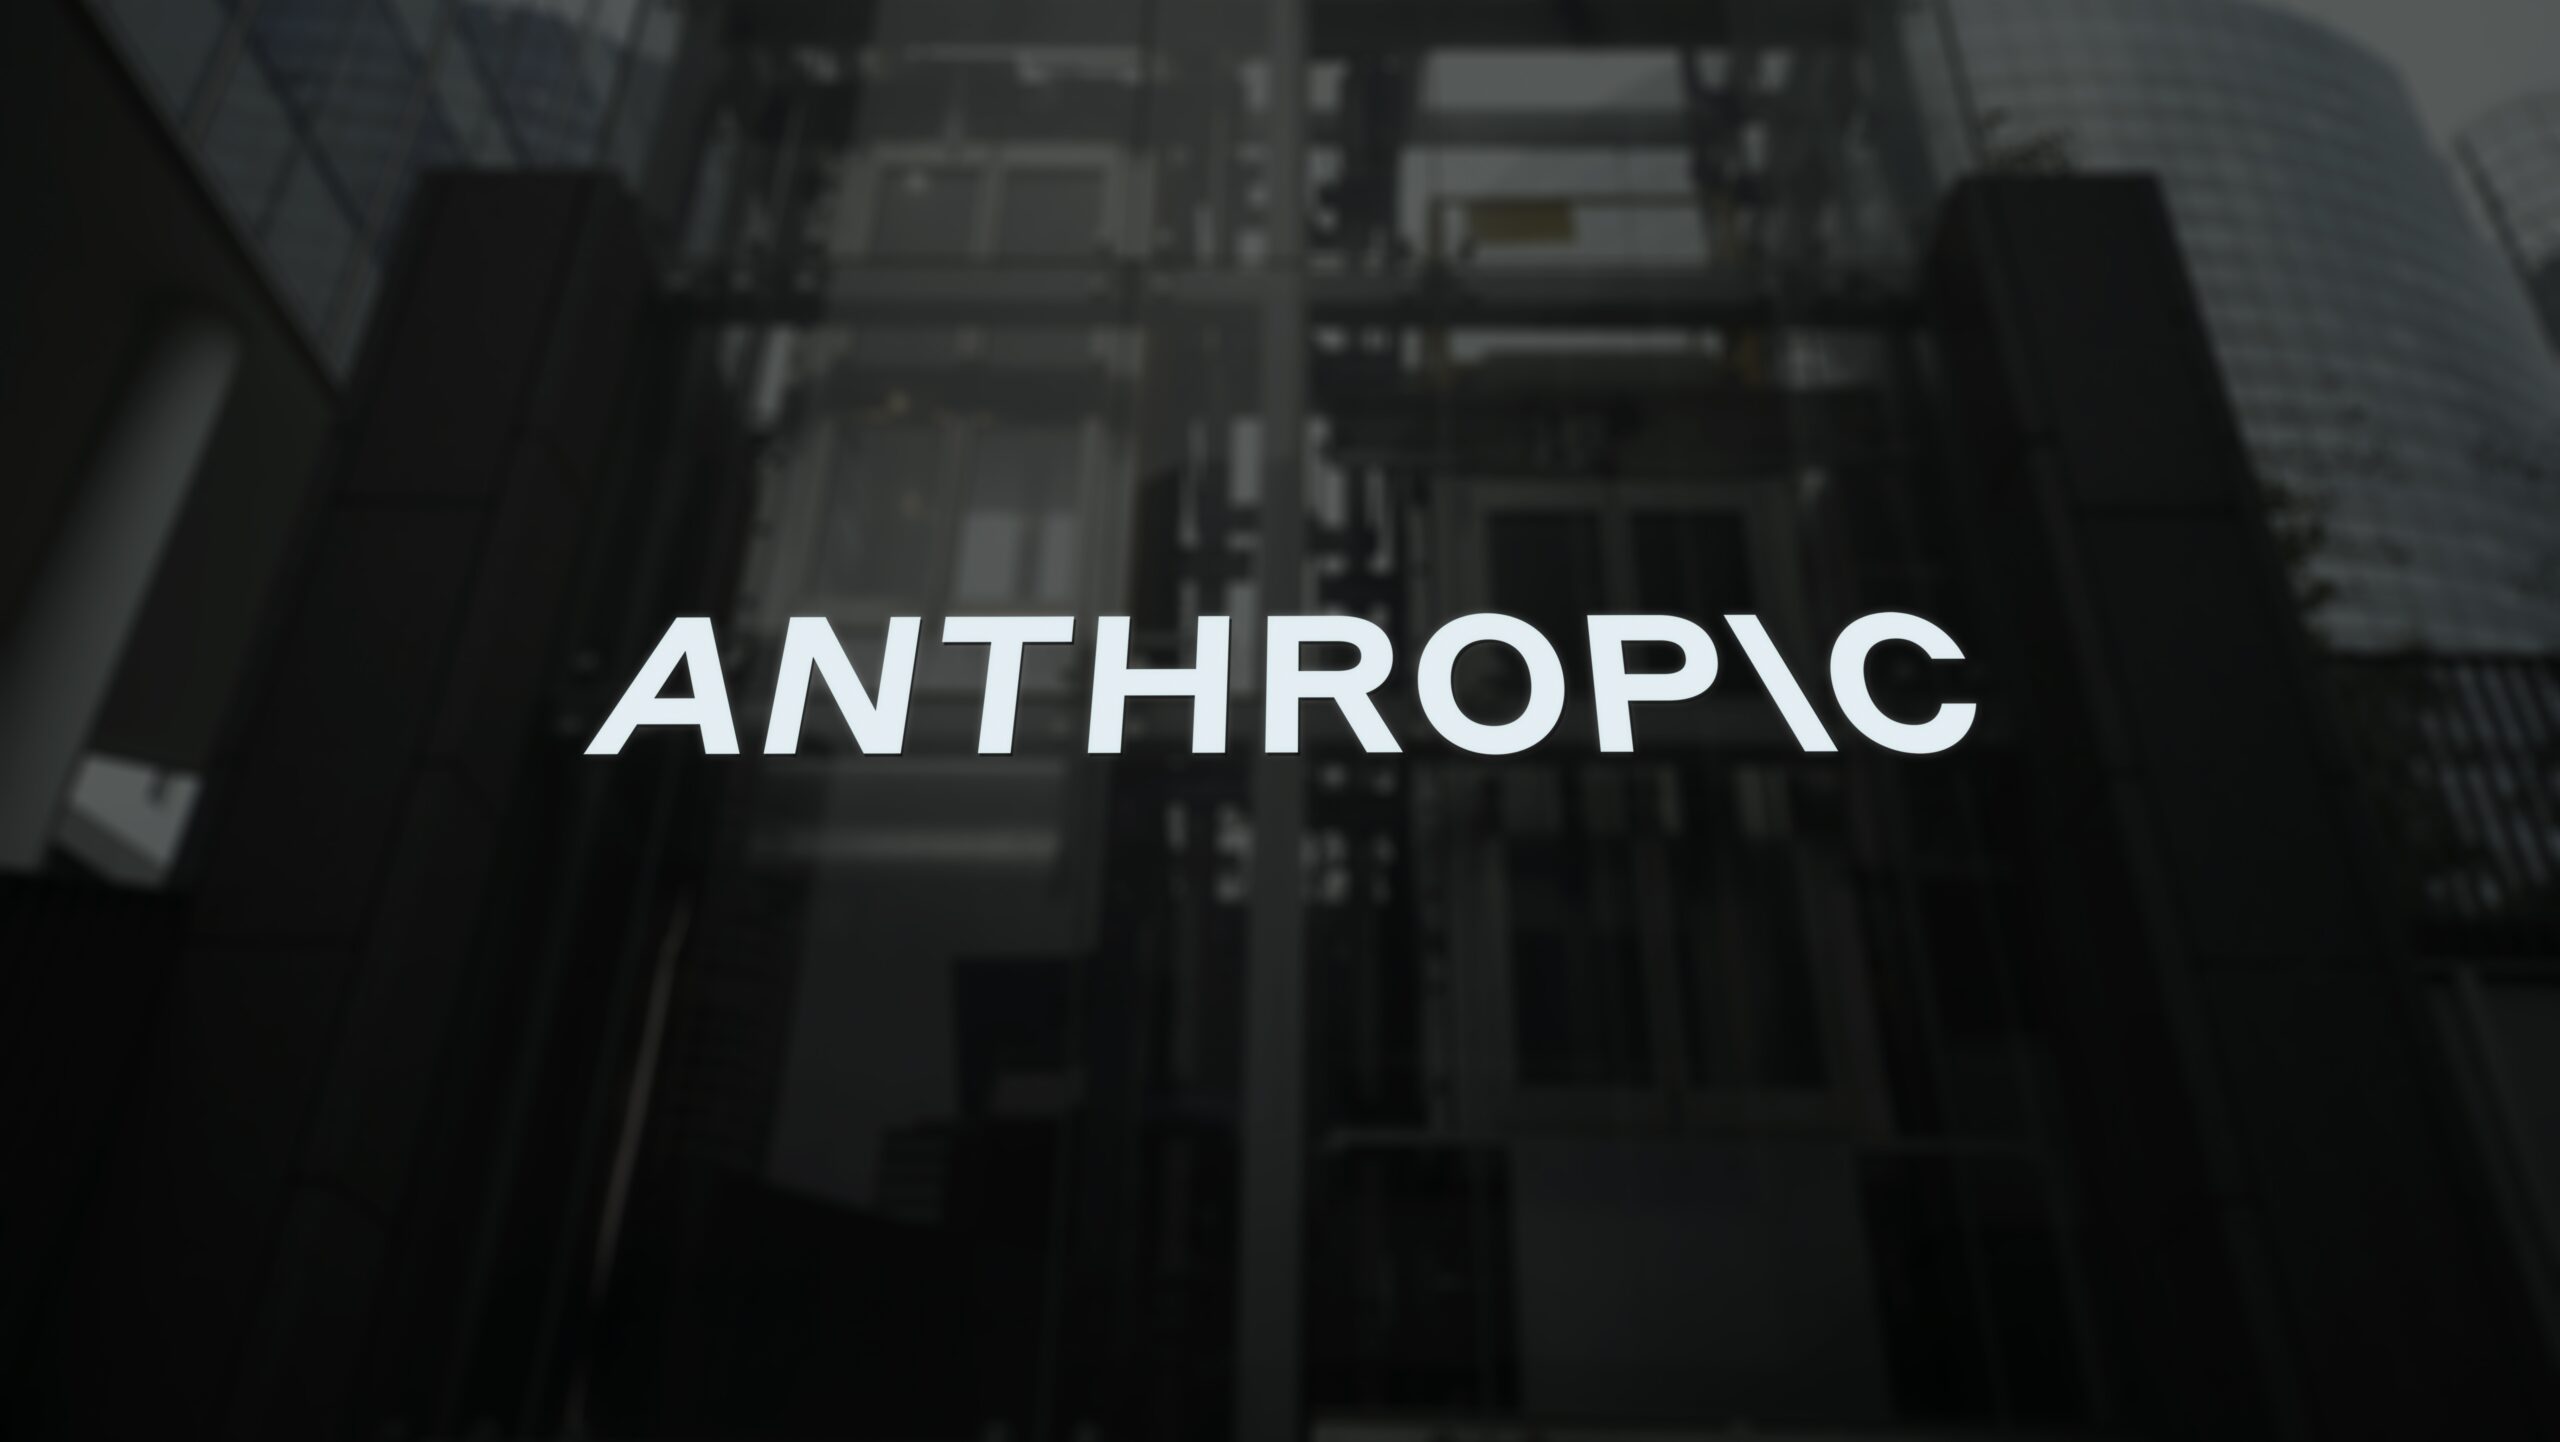 Anthropic Challenges Copyright Infringement Allegations by UMG